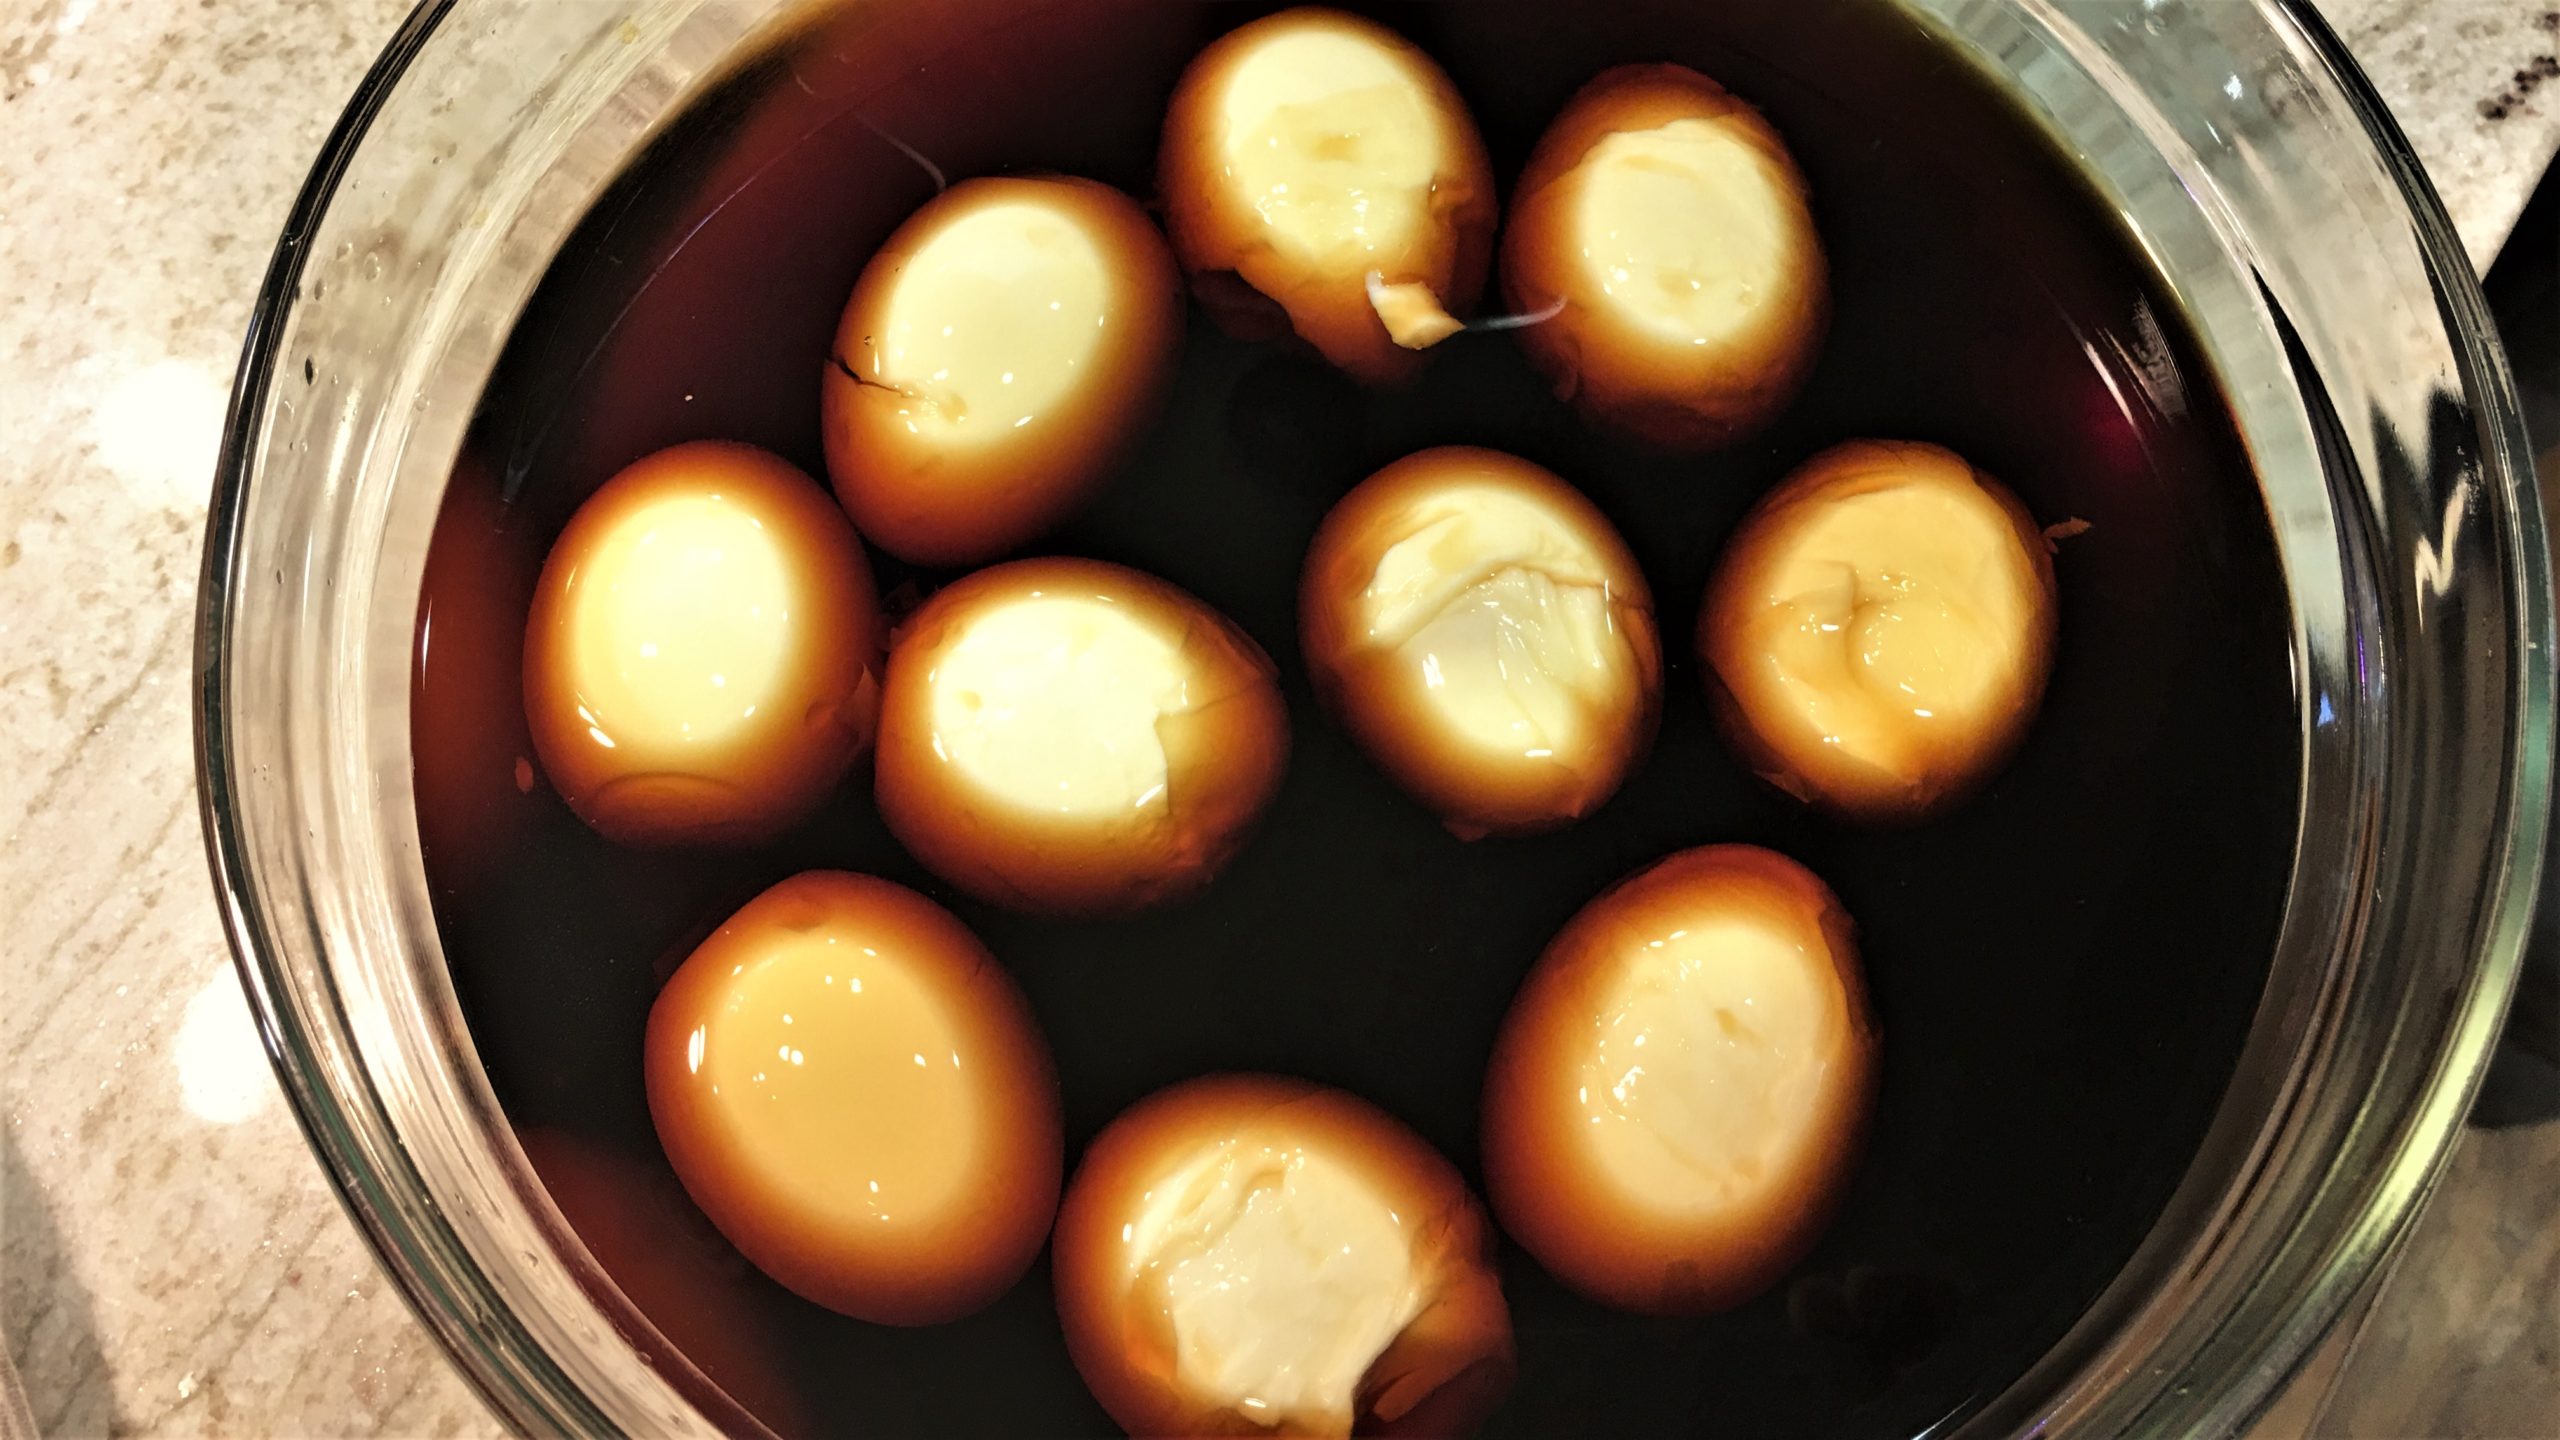 You’ll Want To Make These Seasoned Tea Eggs Over And Over